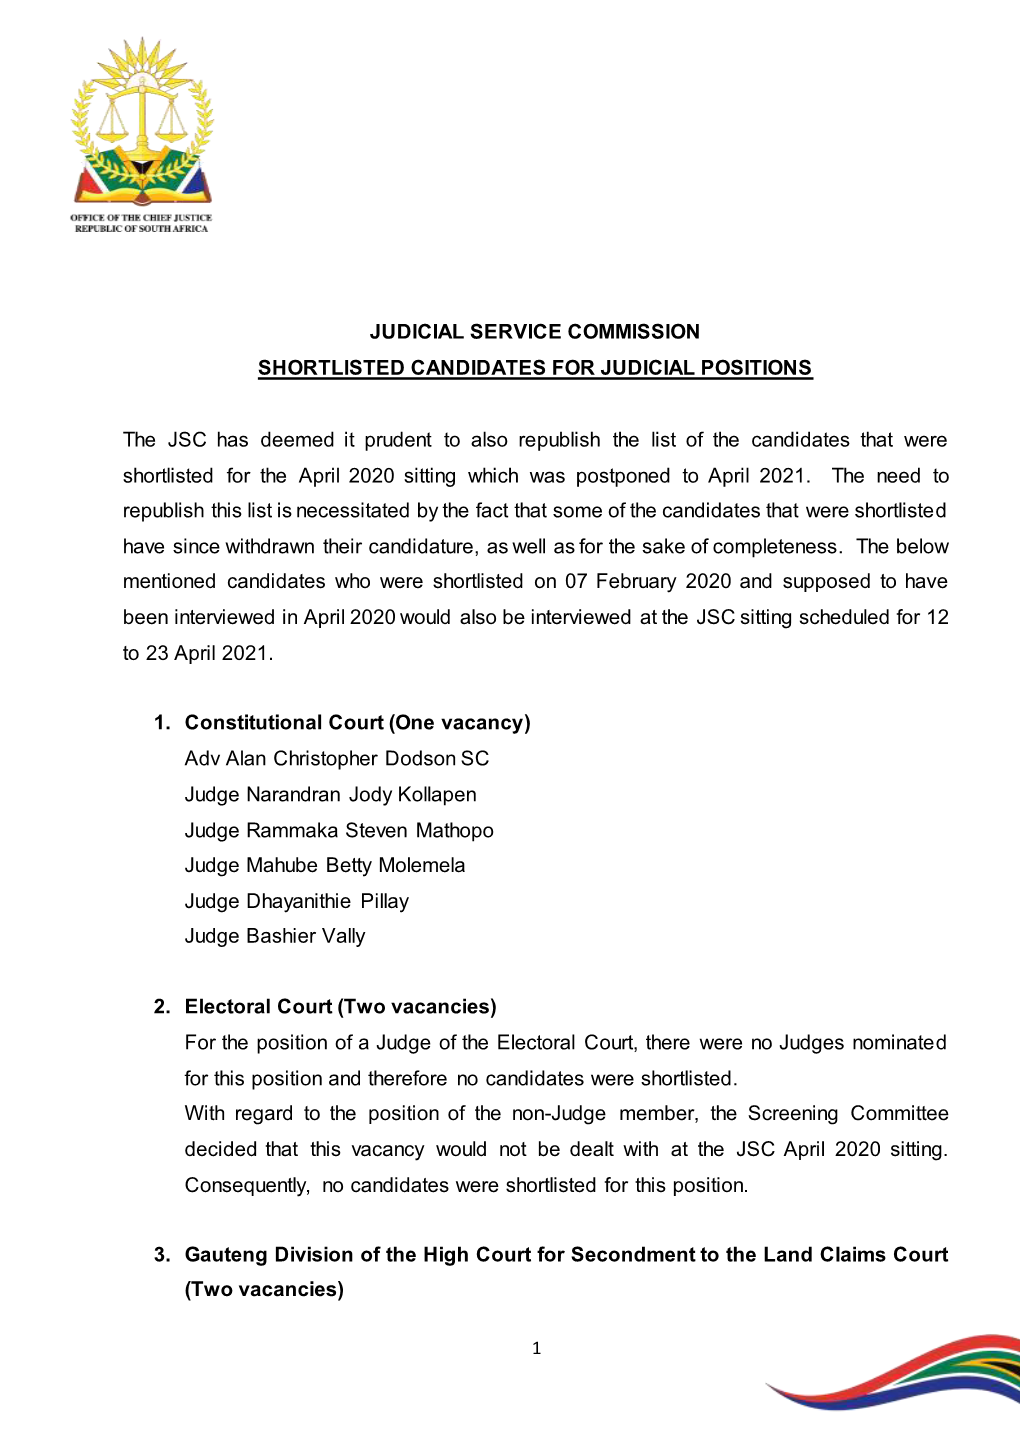 Judicial Service Commission Shortlisted Candidates for Judicial Positions